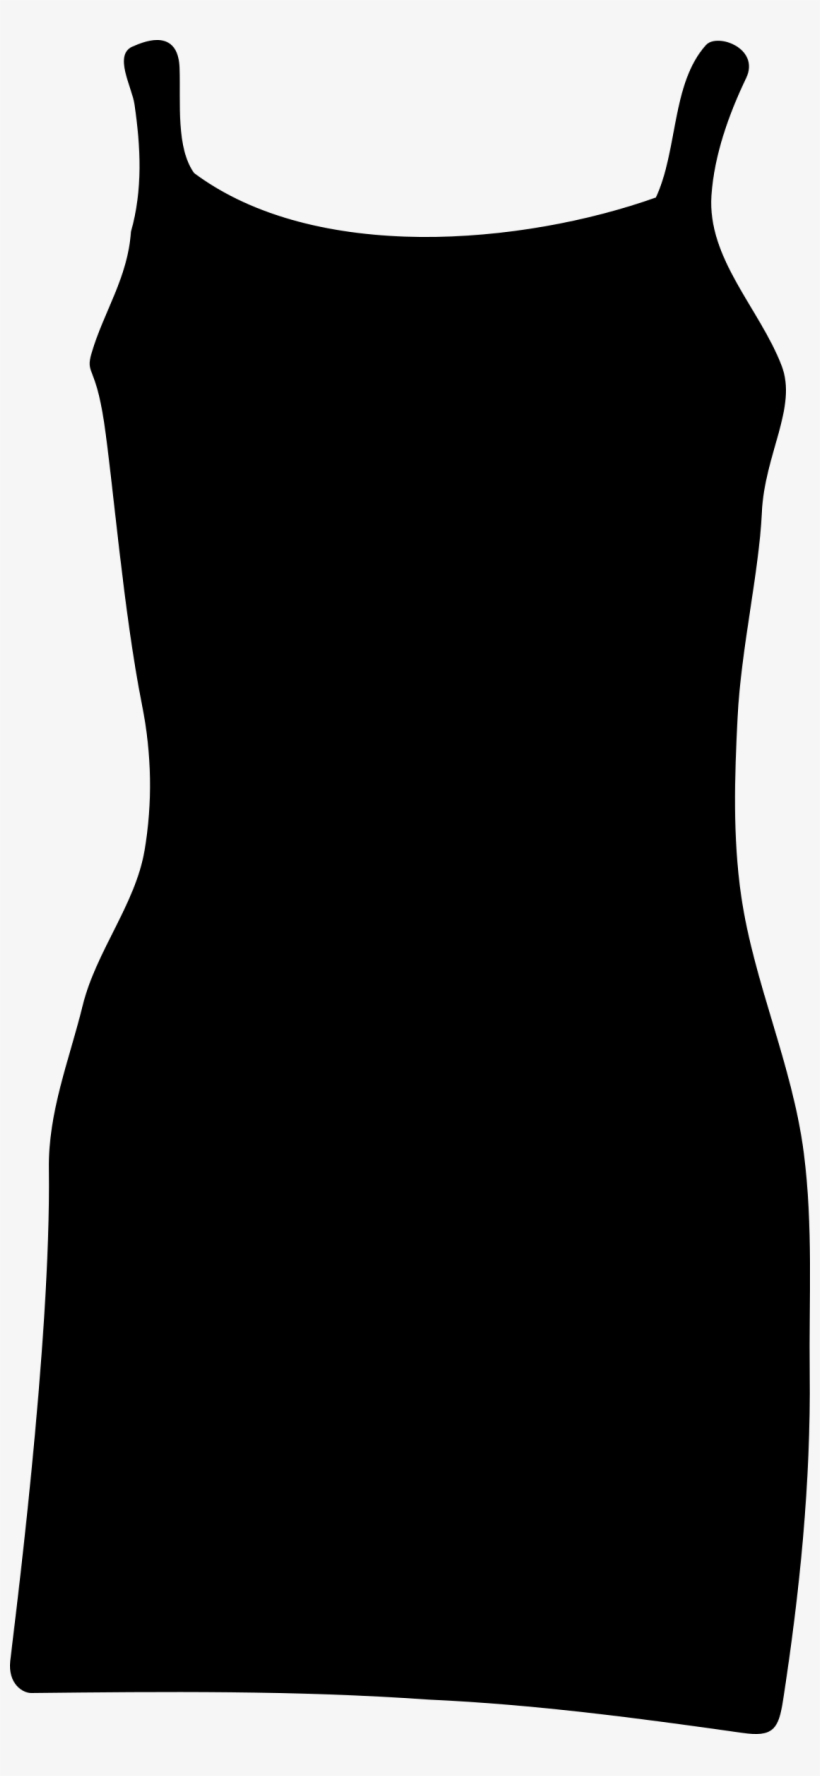 This Free Icons Png Design Of Dress Silhouette, transparent png #2739846